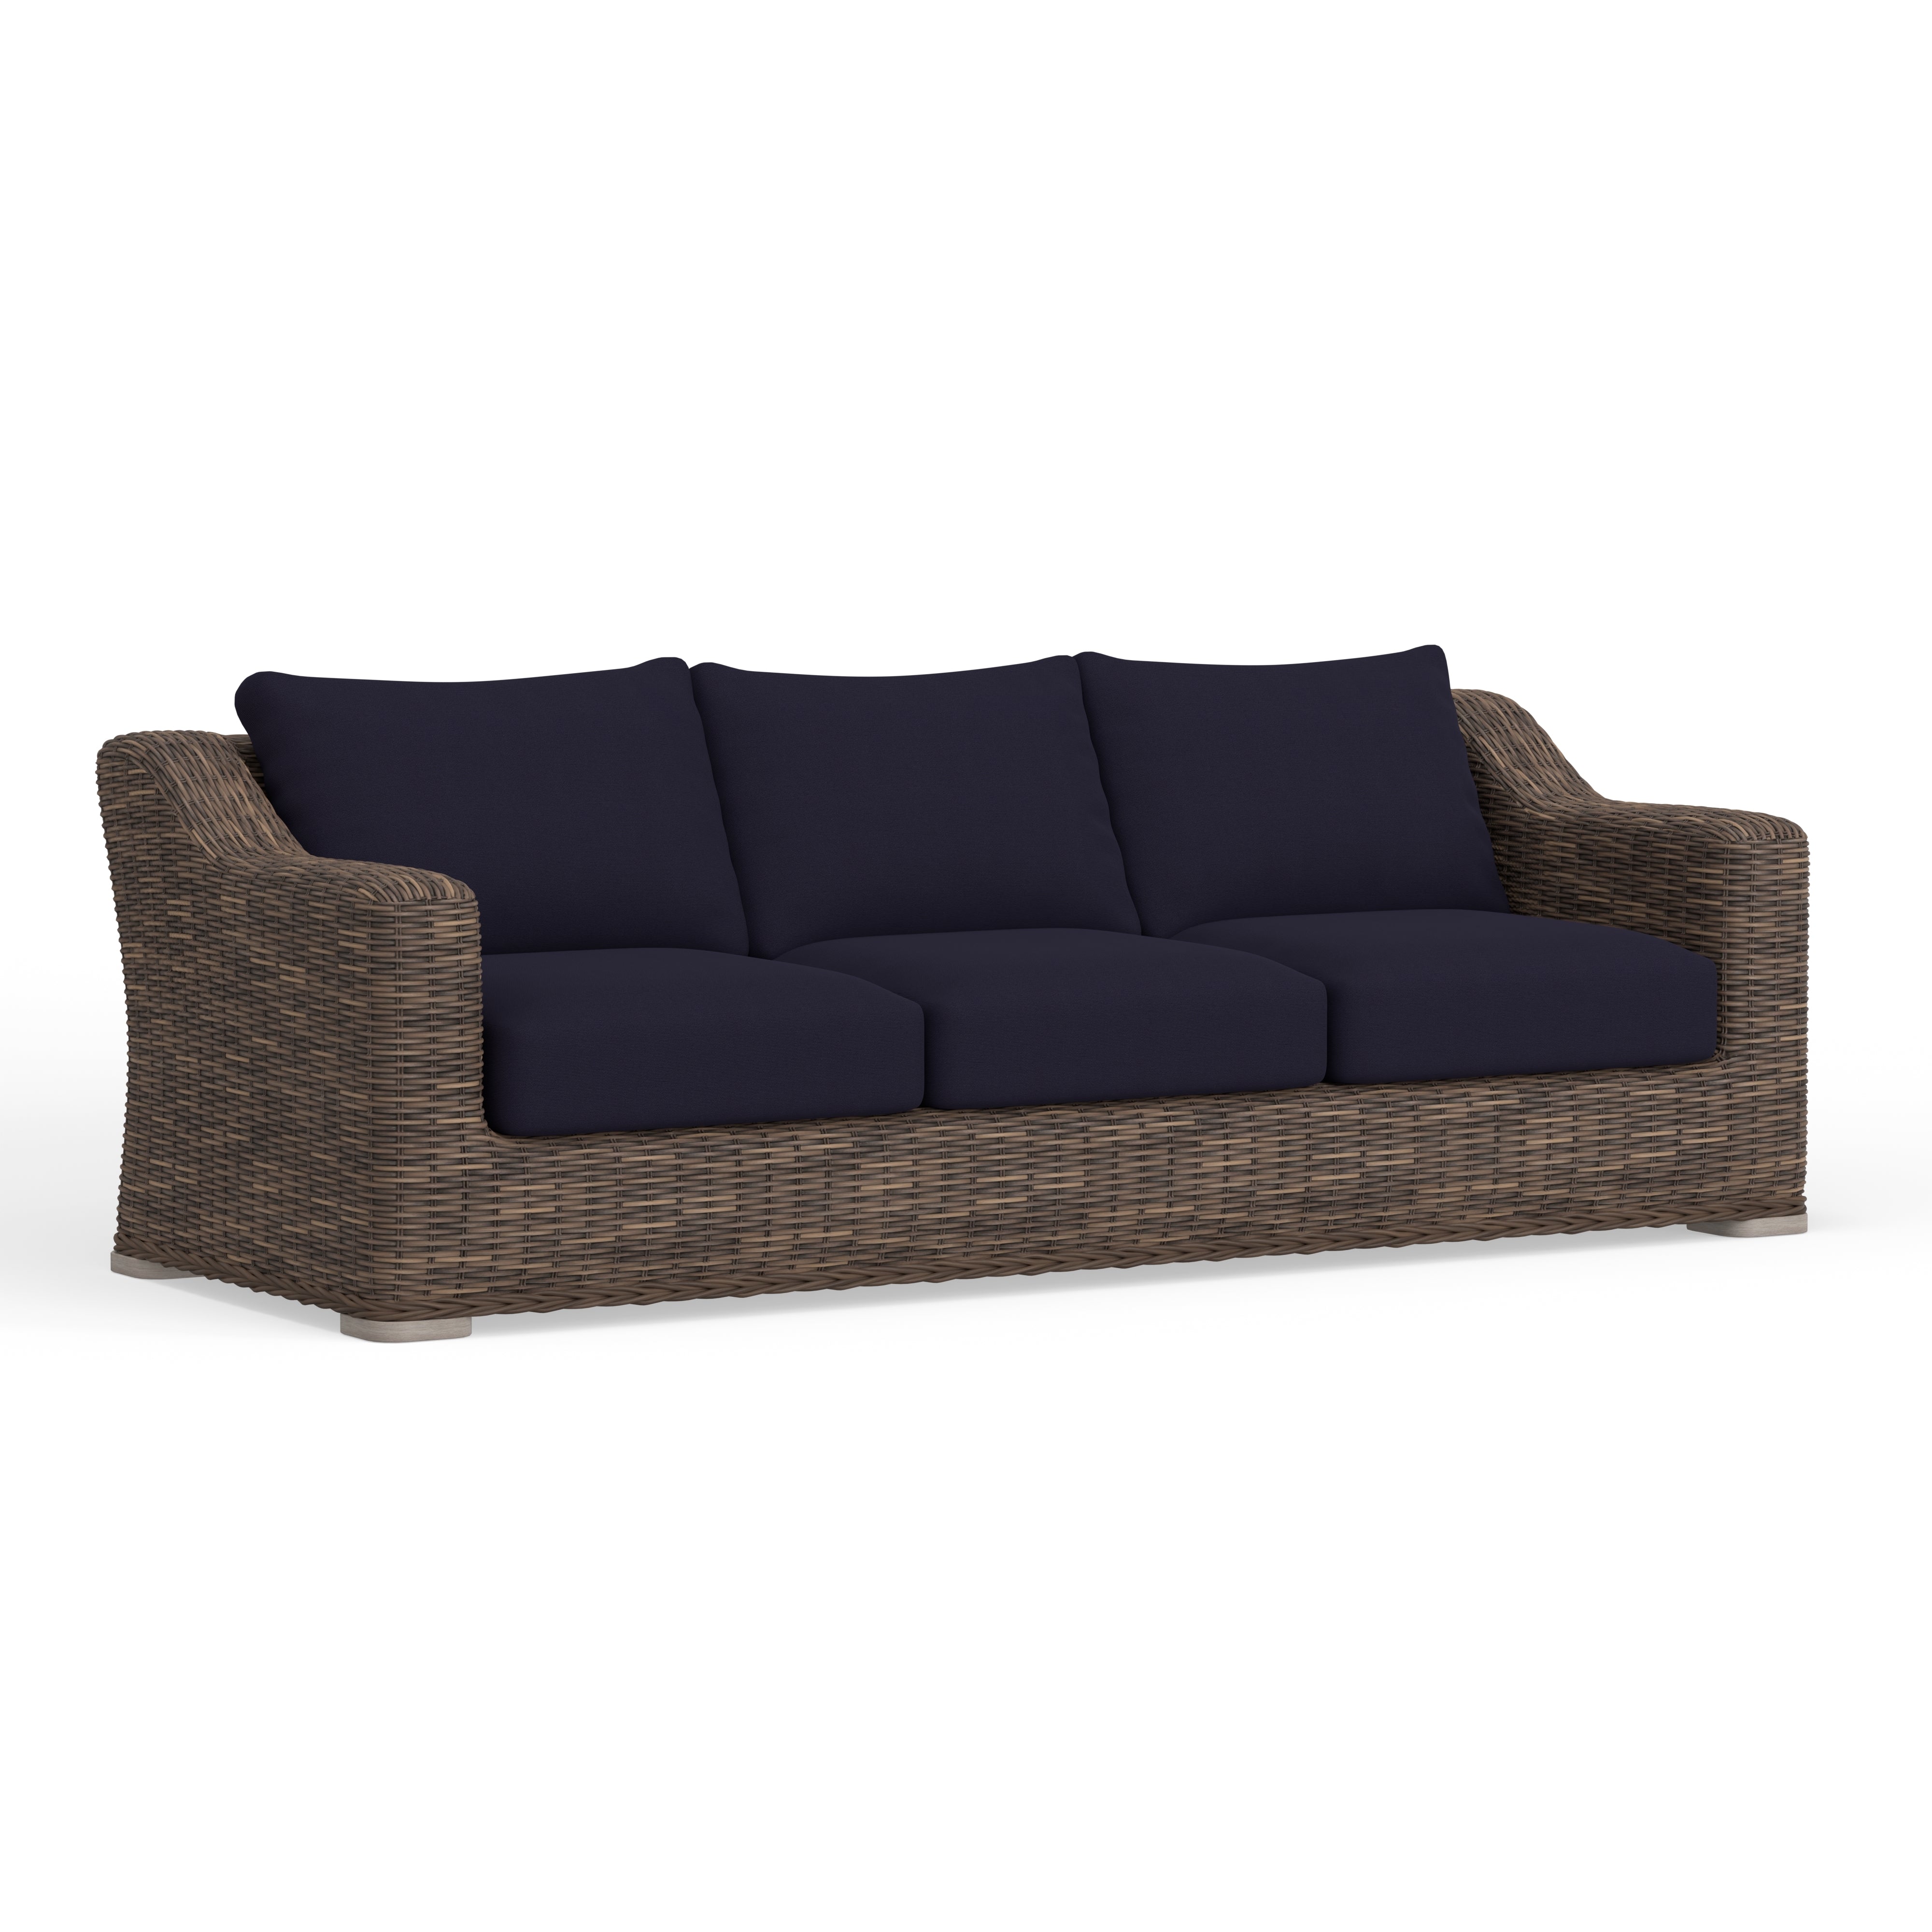 Wicker Sofa With Navy Cushions Built To Last